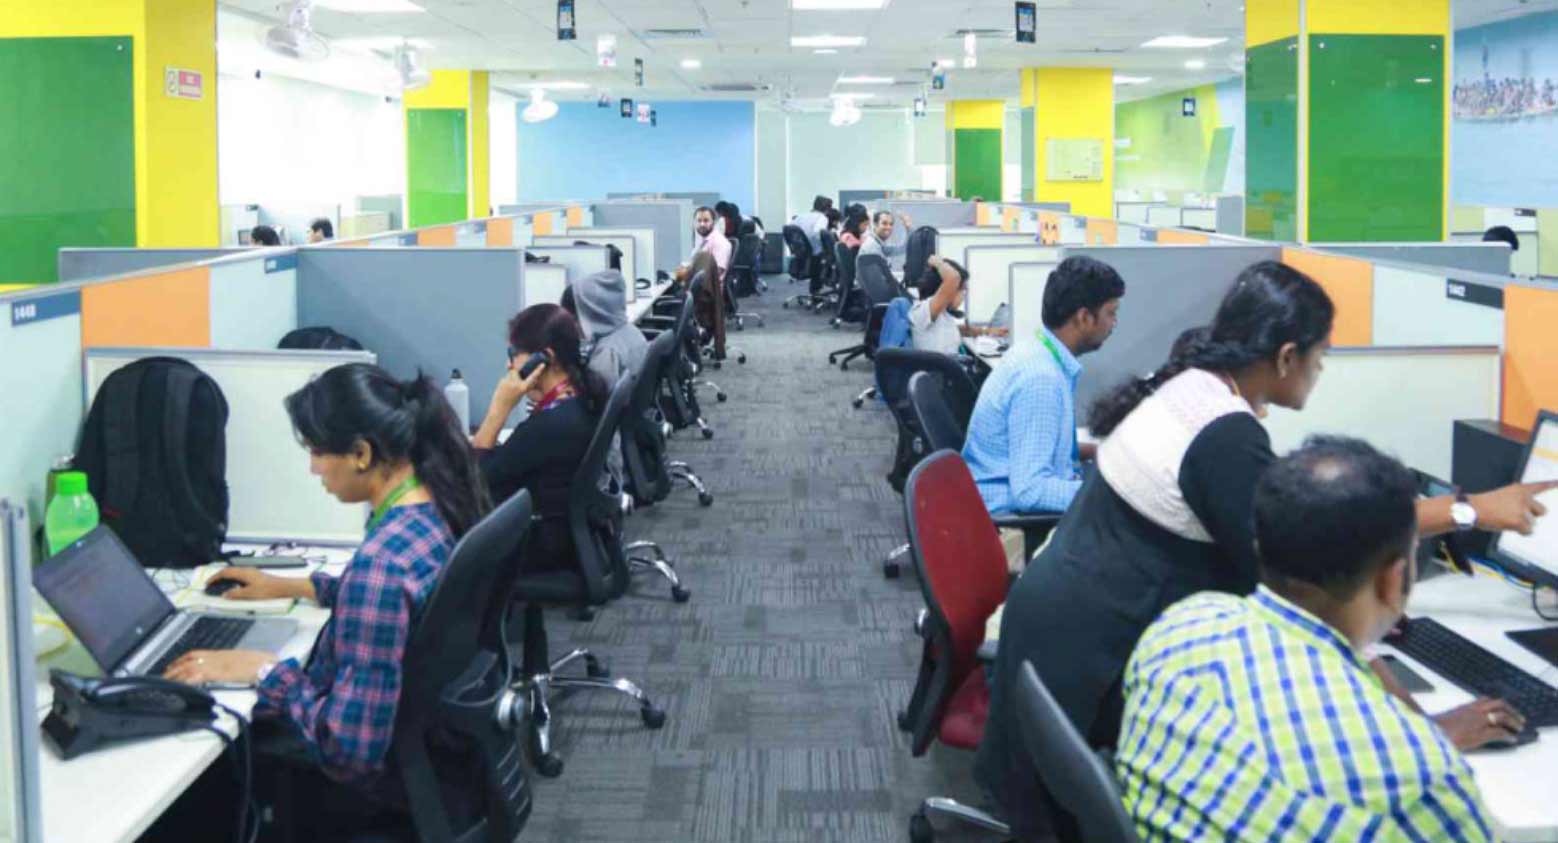 The Indian IT industry is witnessing a sharp decline in fresher hiring